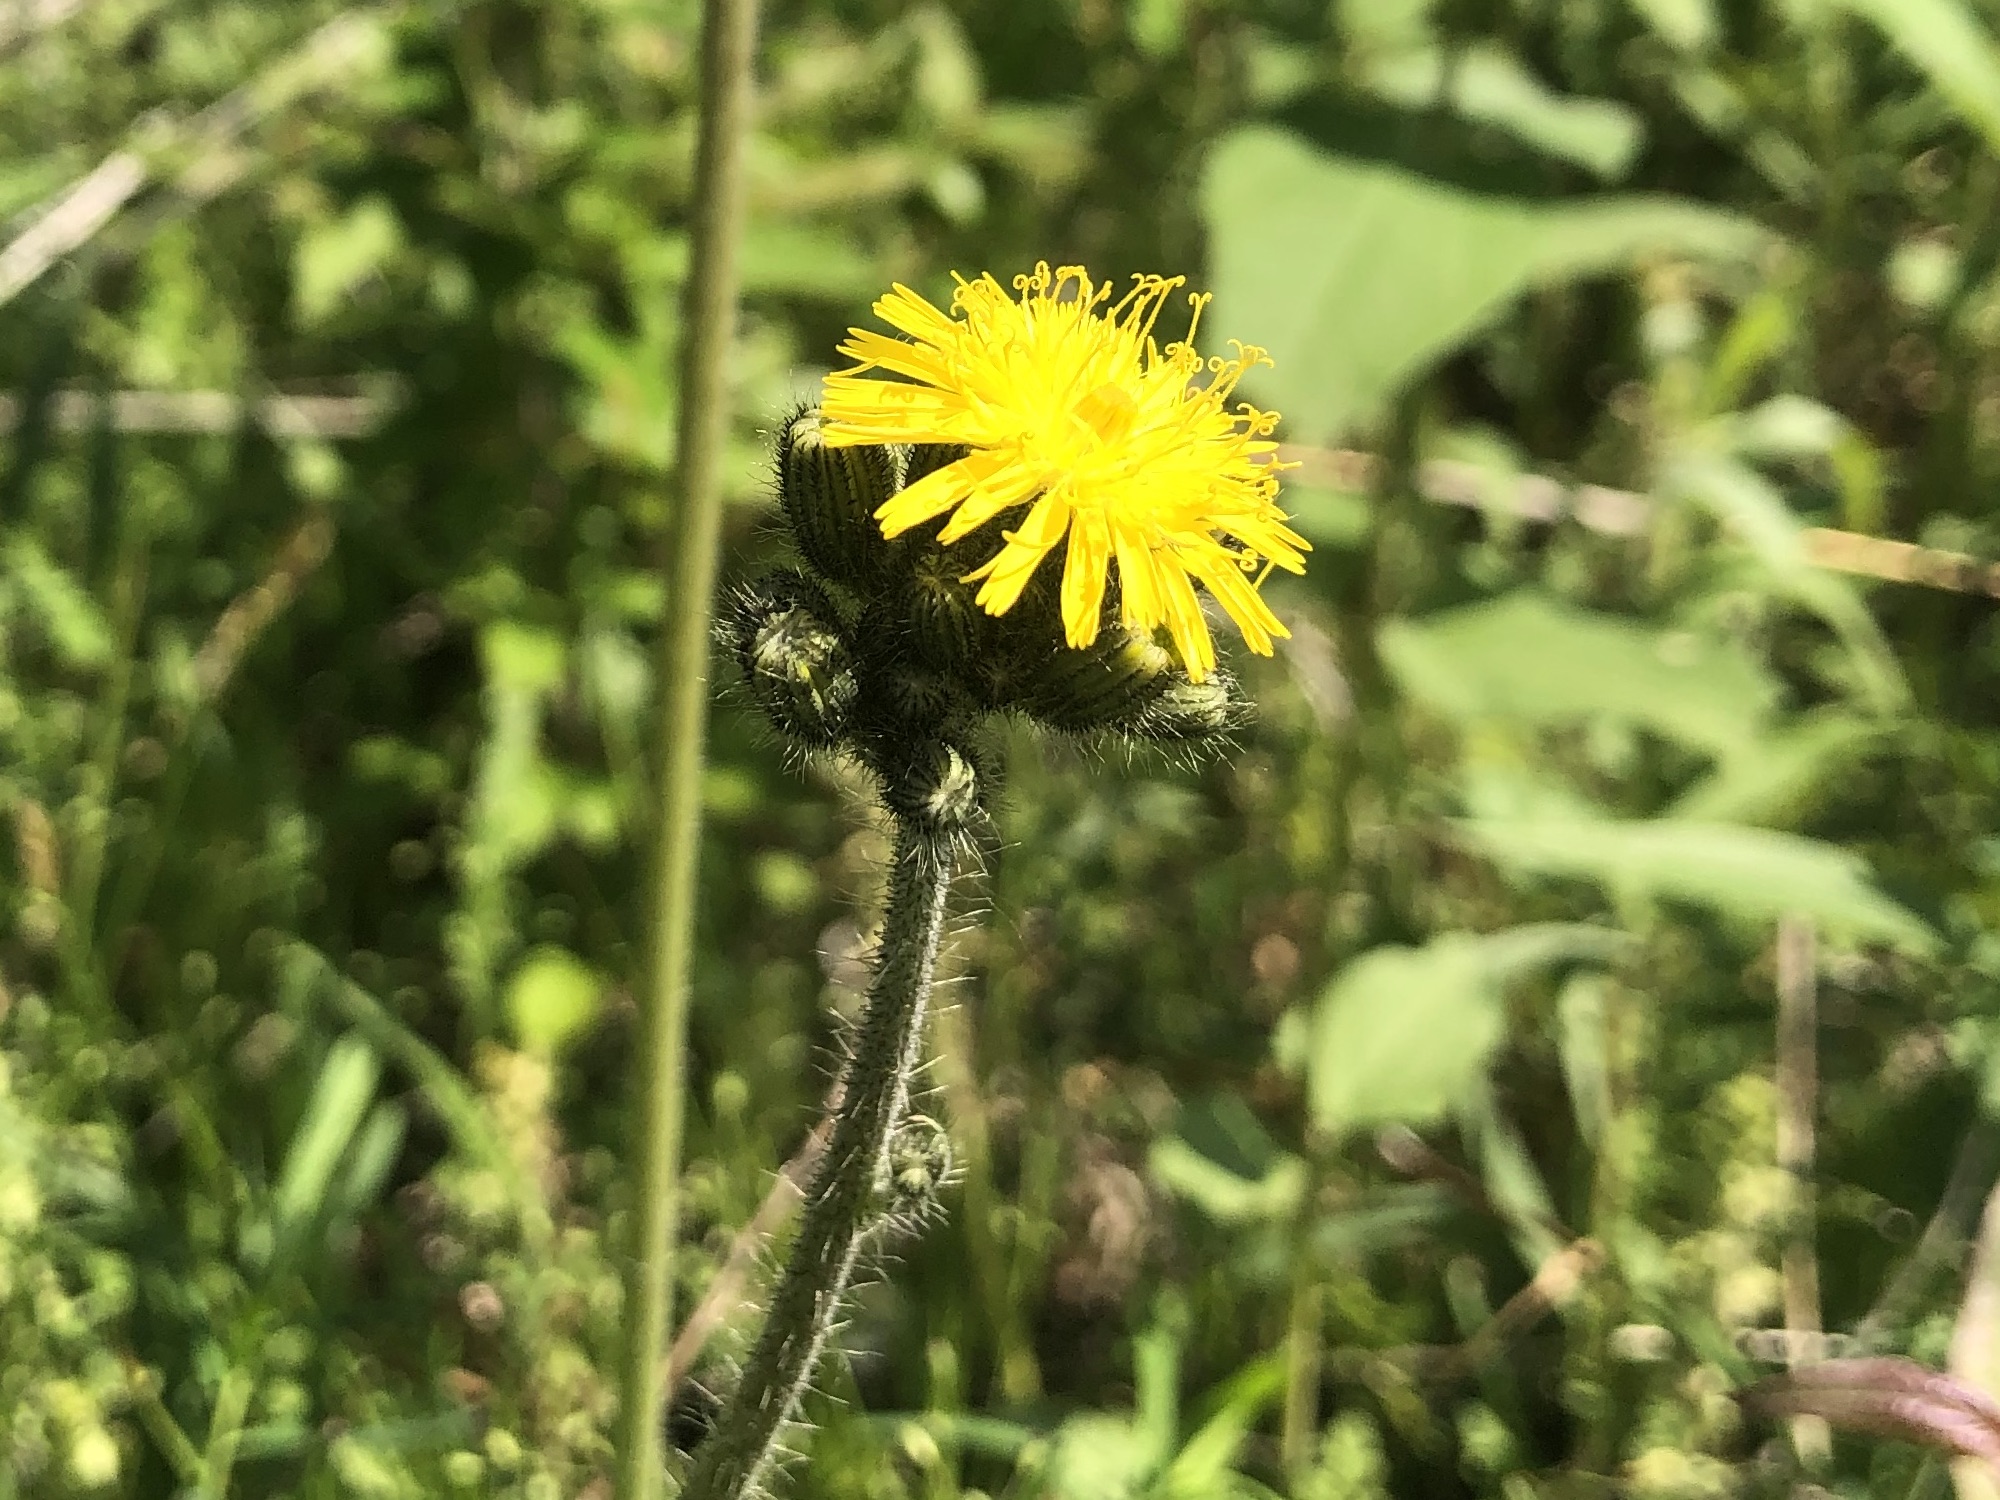 Meadow Hawkweed in the Curtis Prairie in the University of Wisconsin-Madison Arboretum in Madison, Wisconsin on June 9, 2022.